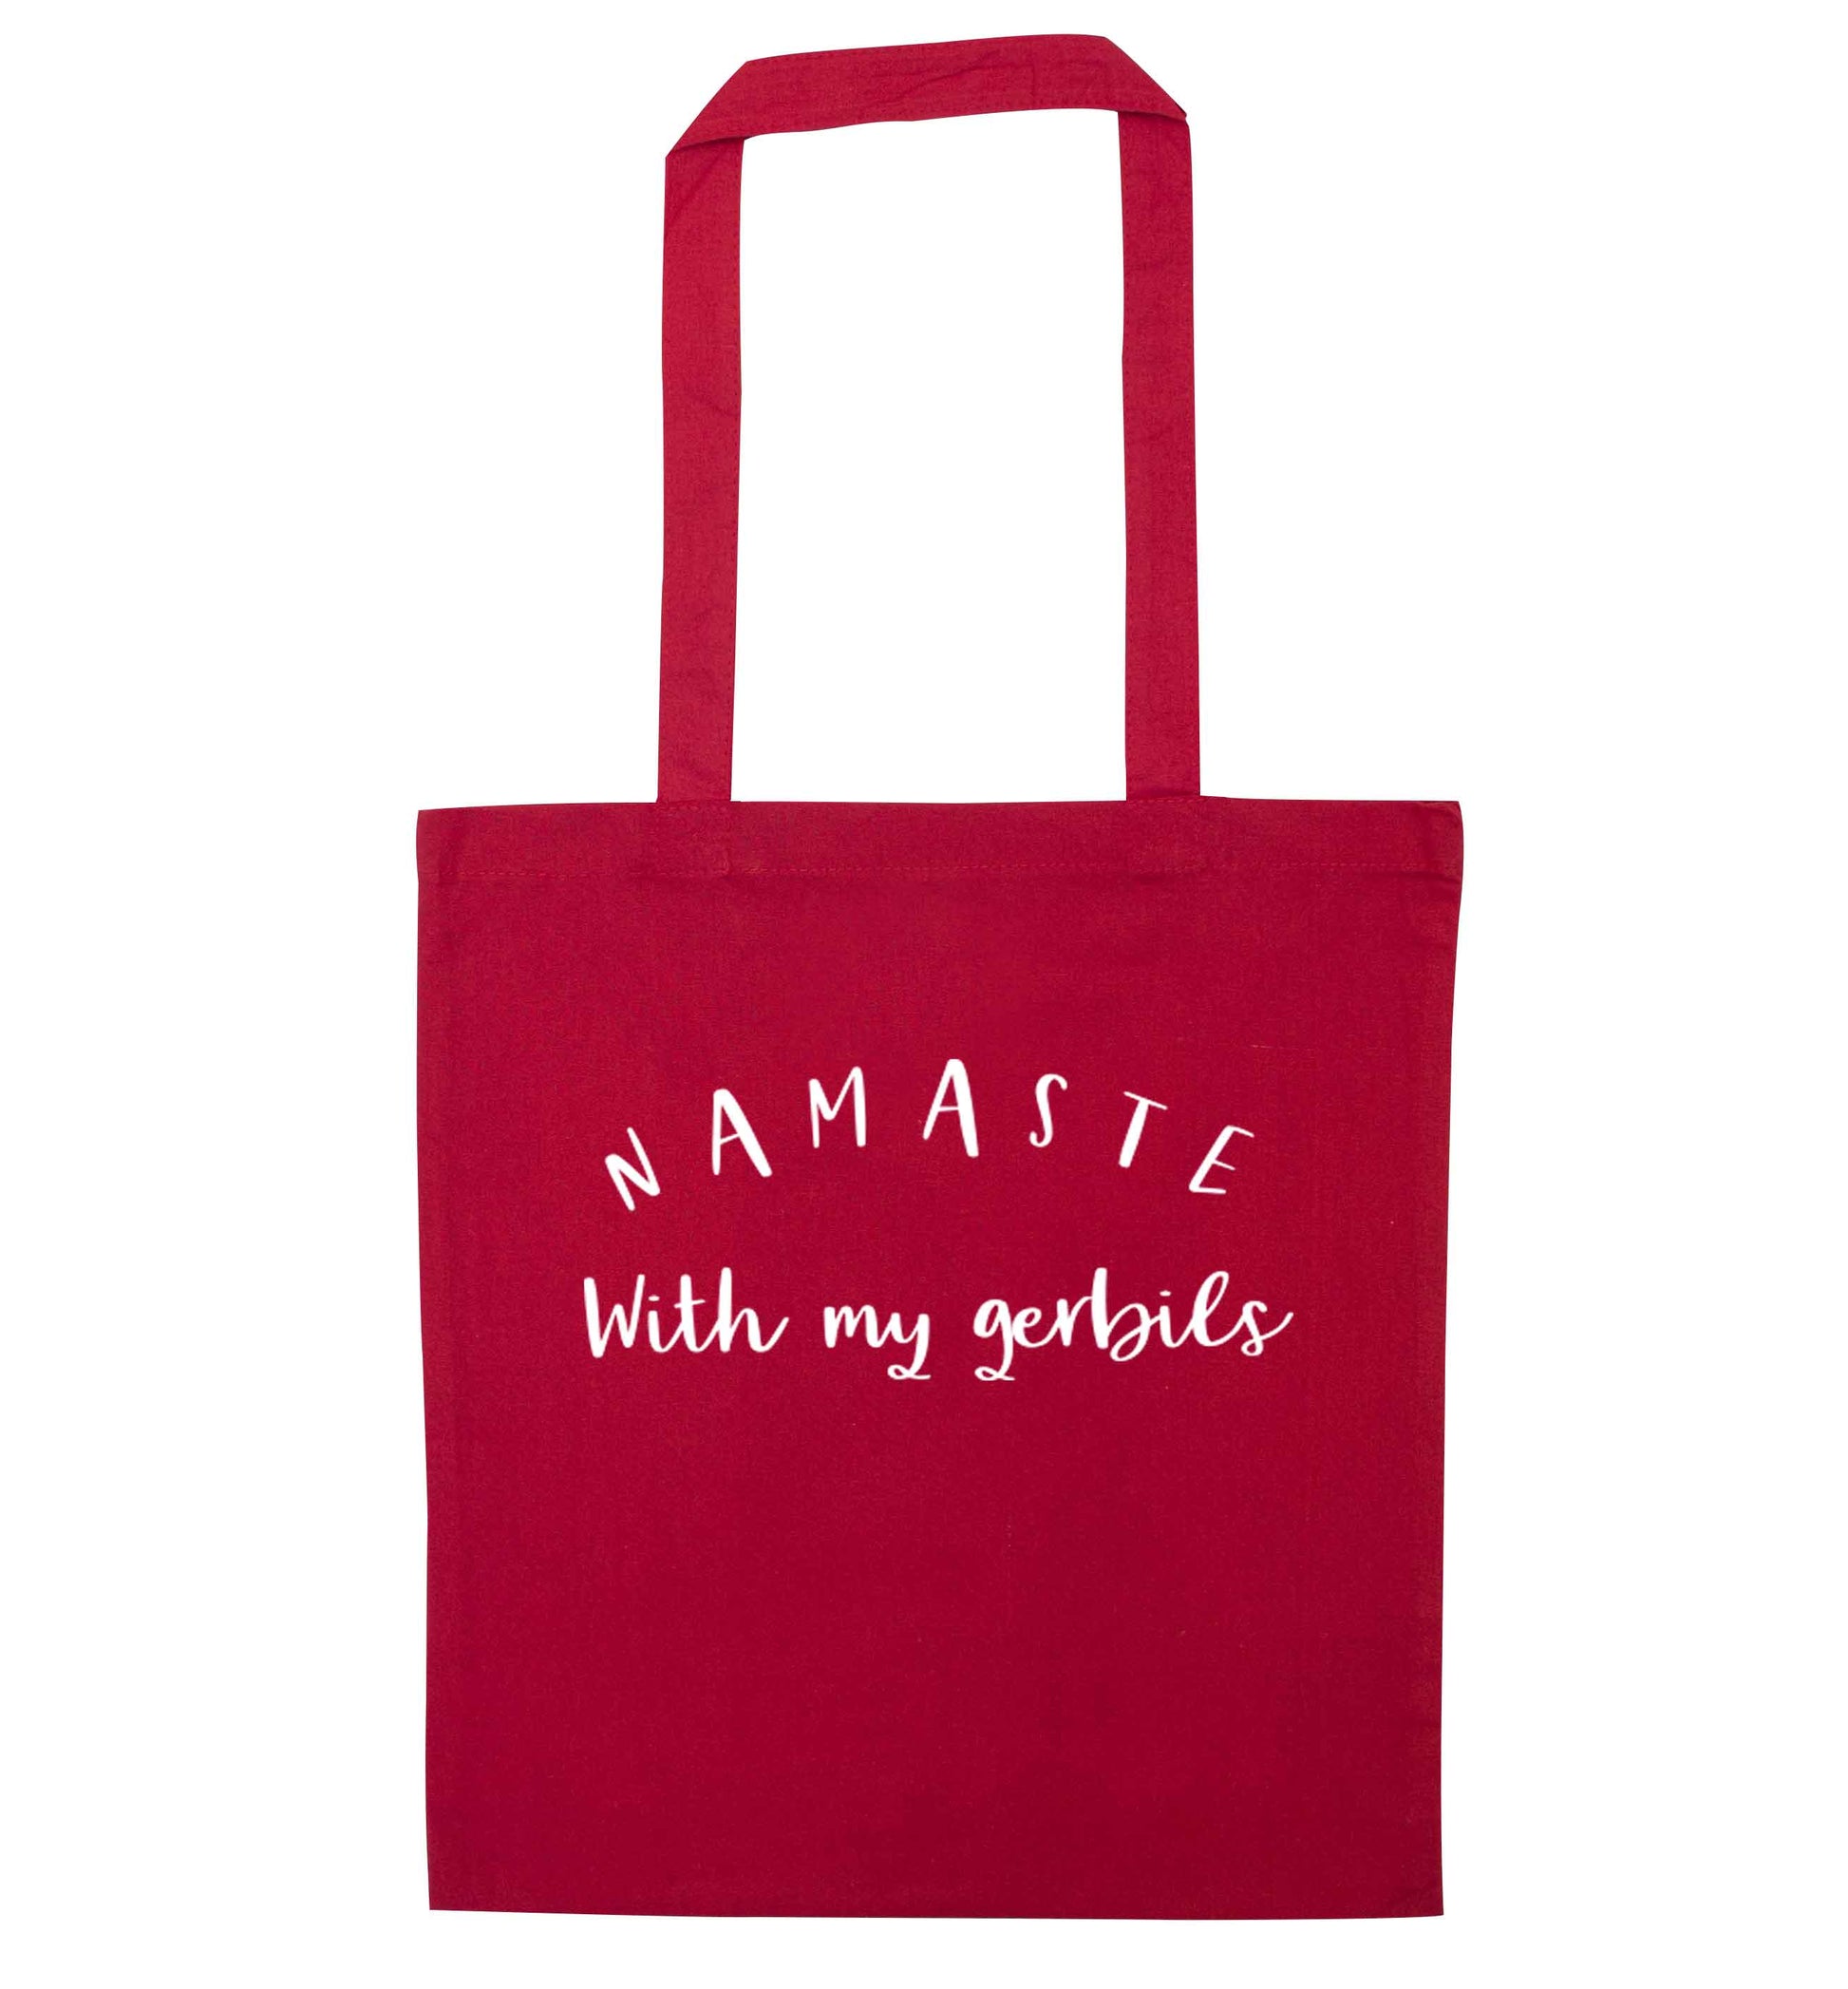 Namaste with my gerbils red tote bag